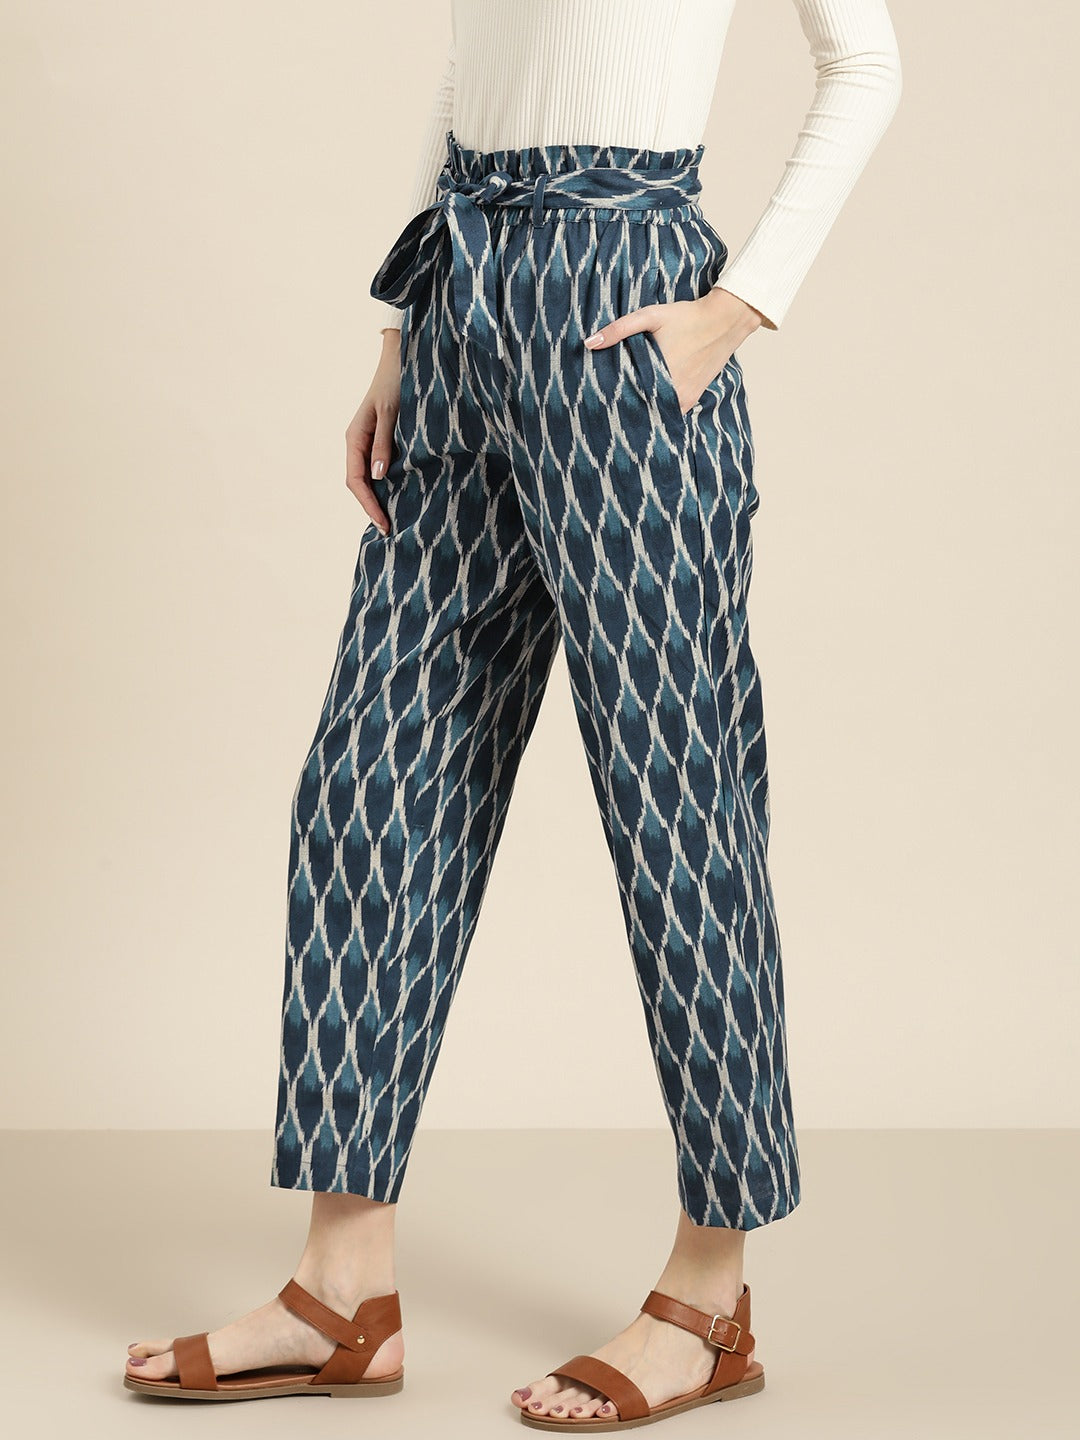 Boden St Ives Paperbag Pants | Blue trousers outfit, Paperbag pants, Fashion